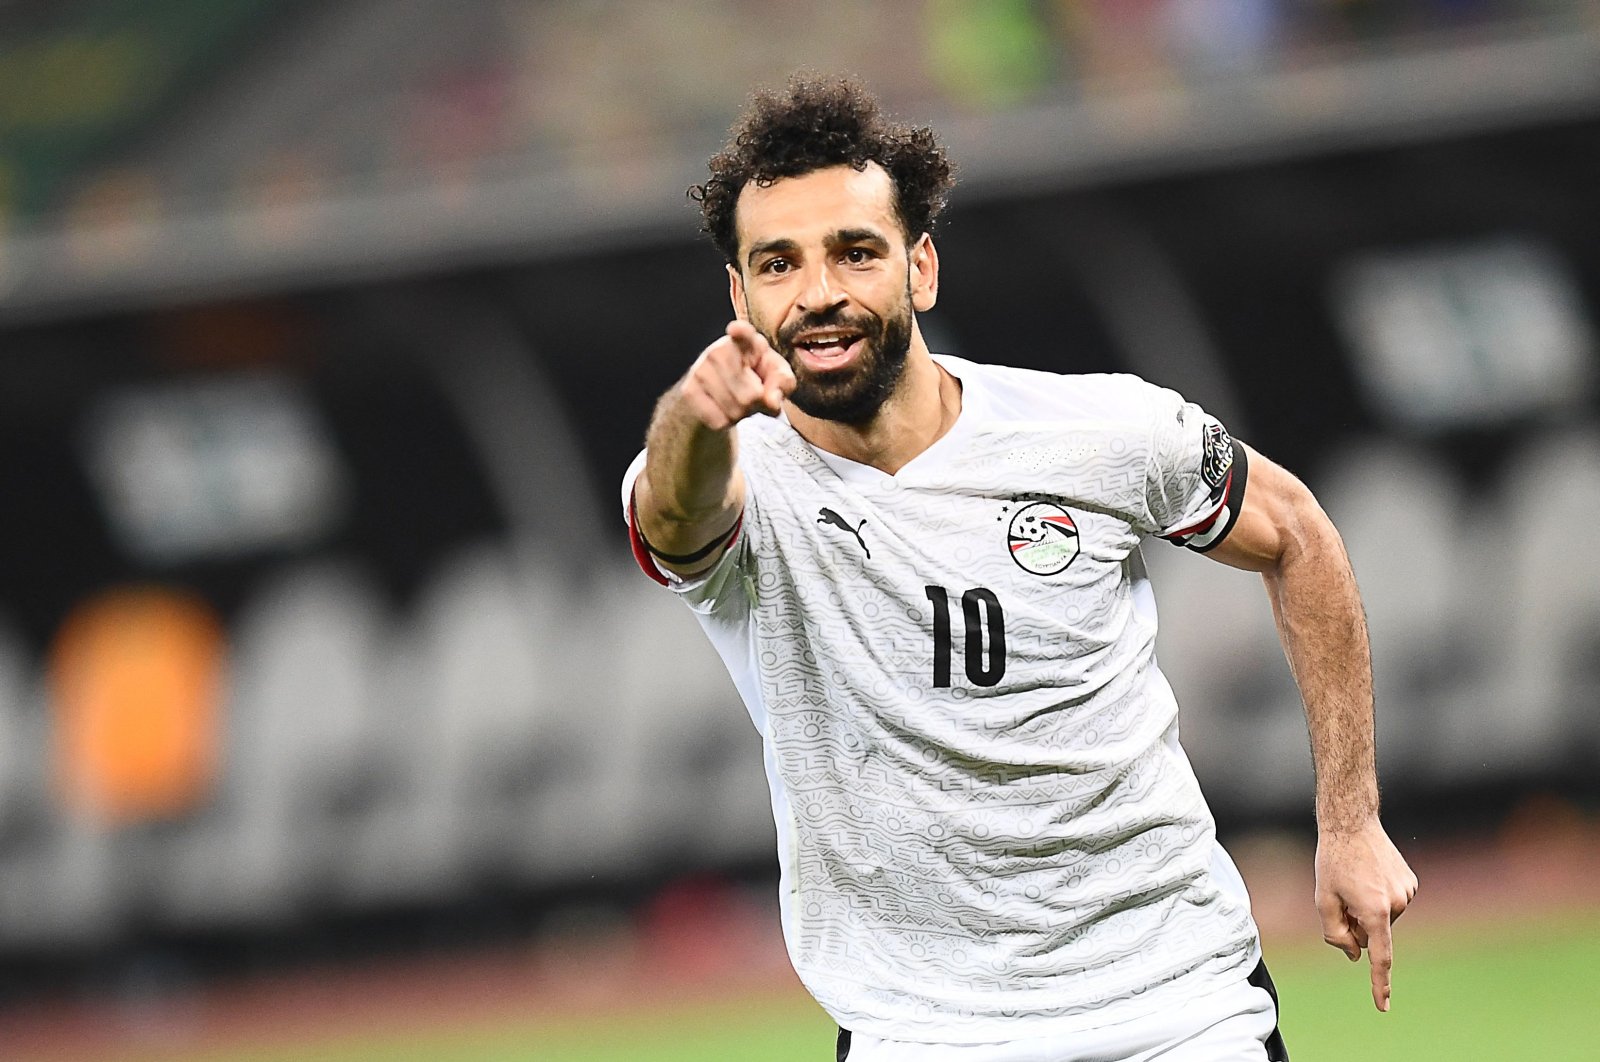 Egypt forward Mohamed Salah celebrates after winning the AFCON last-16 match against Ivory Coast, Douala, Cameroon, Jan. 26, 2022. (AFP Photo)